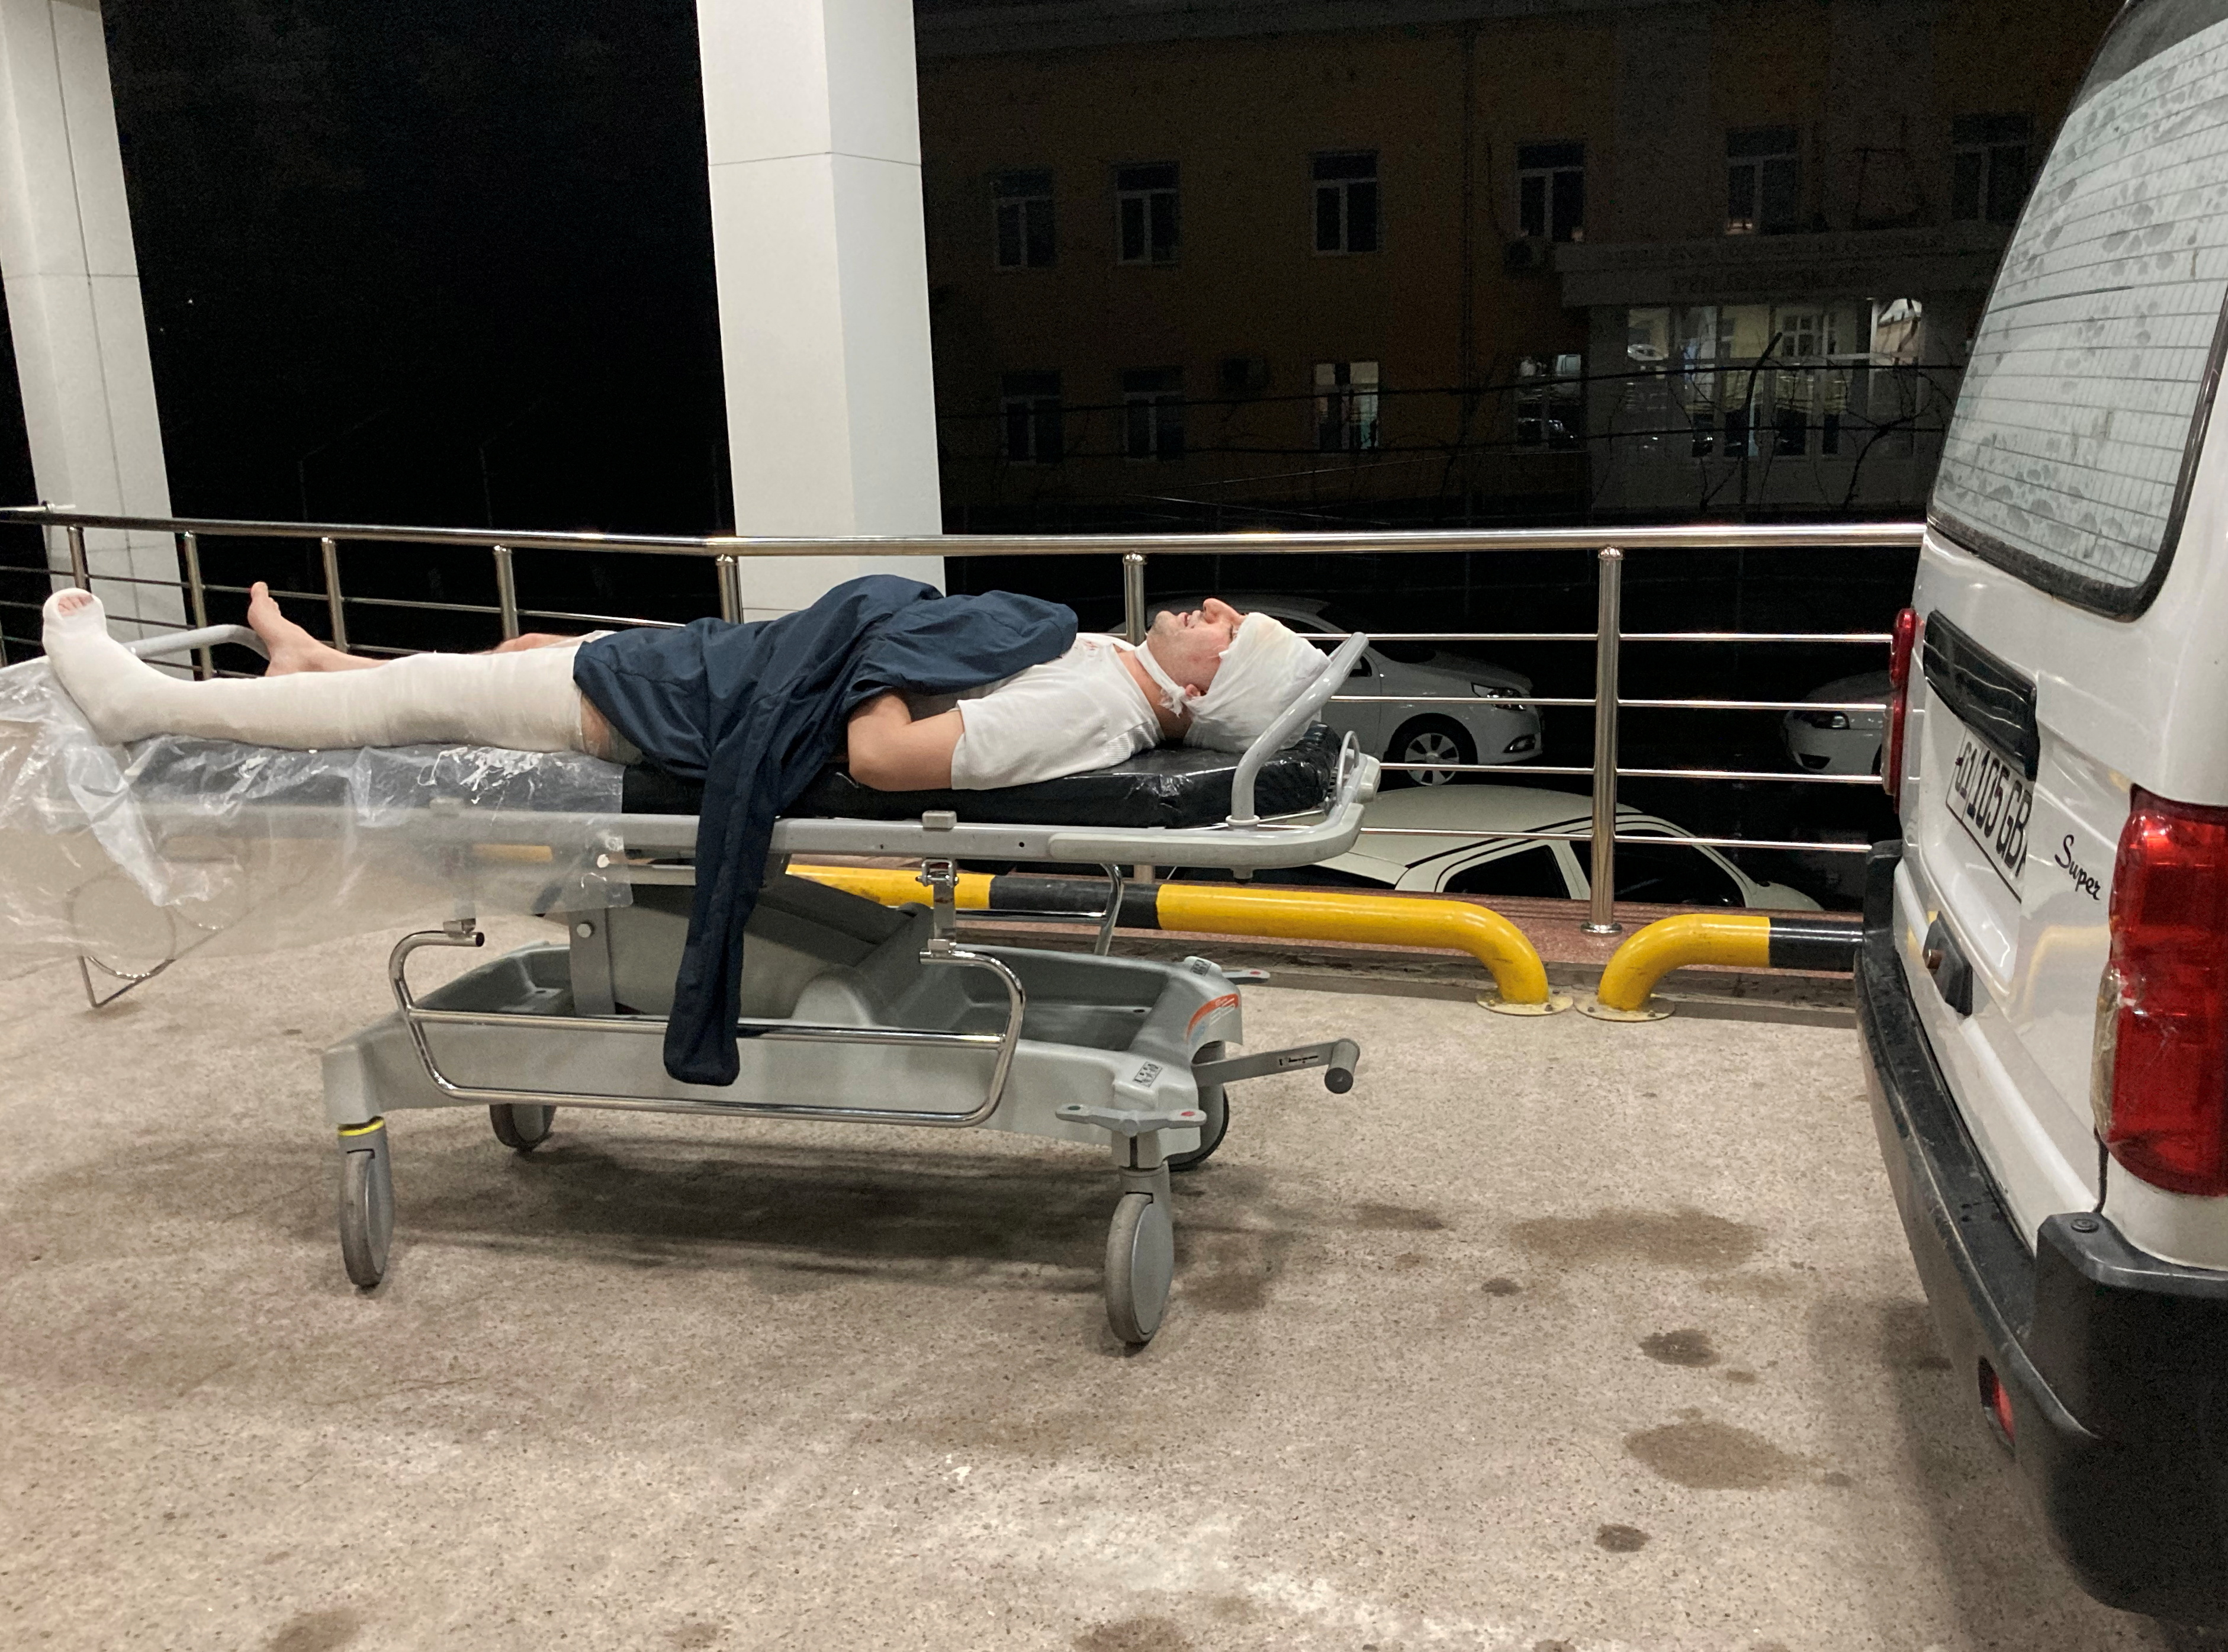 Blogger Miraziz Bazarov lies on a stretcher upon his arrival at a hospital after he was beaten in Tashkent